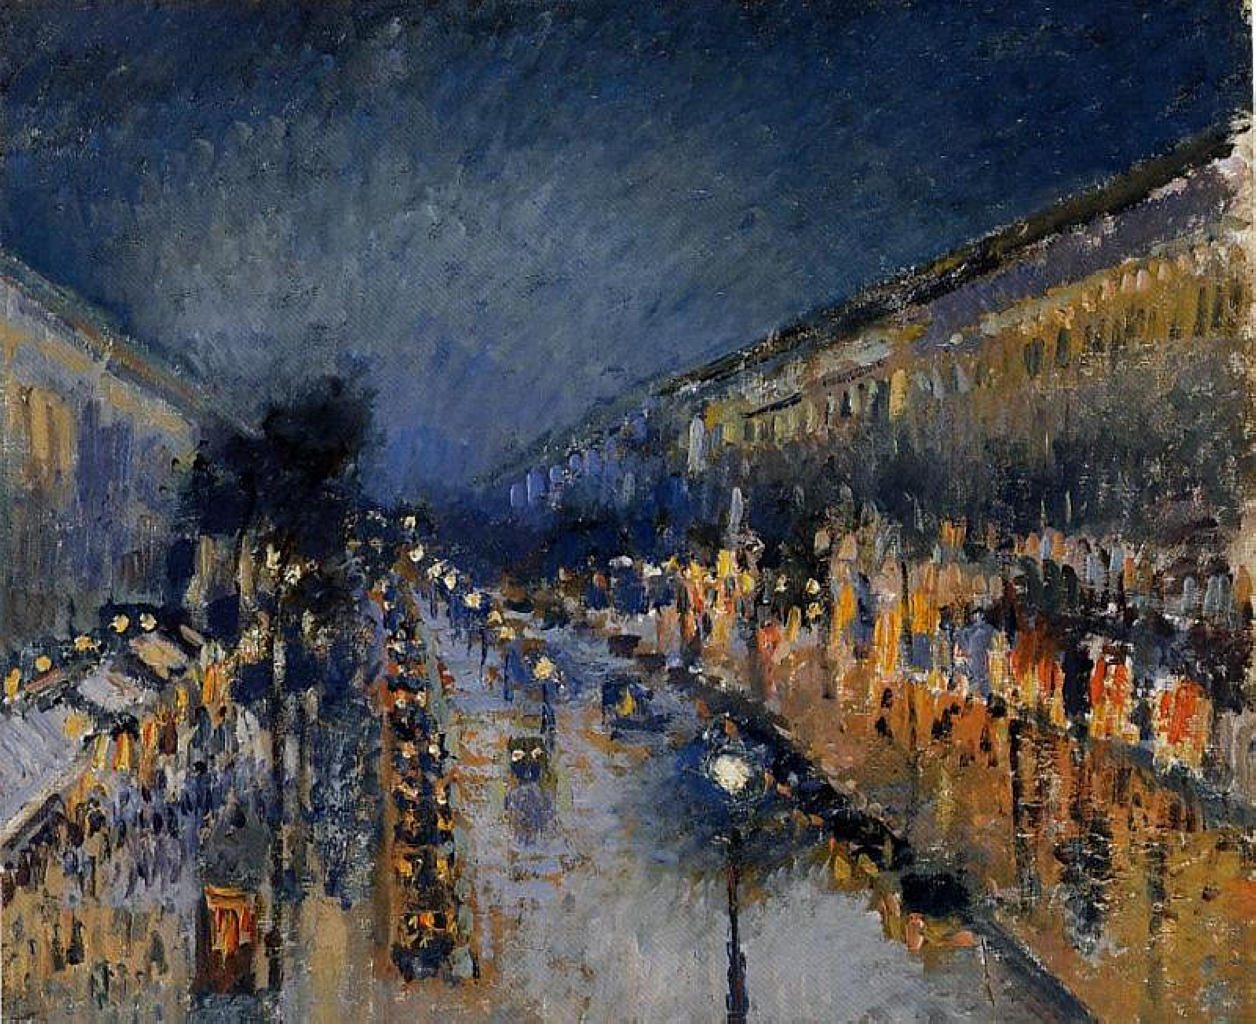 The Boulevard Montmartre at Night by Camille Pissarro - 1897 - 53.3 x 64.8 cm National Gallery